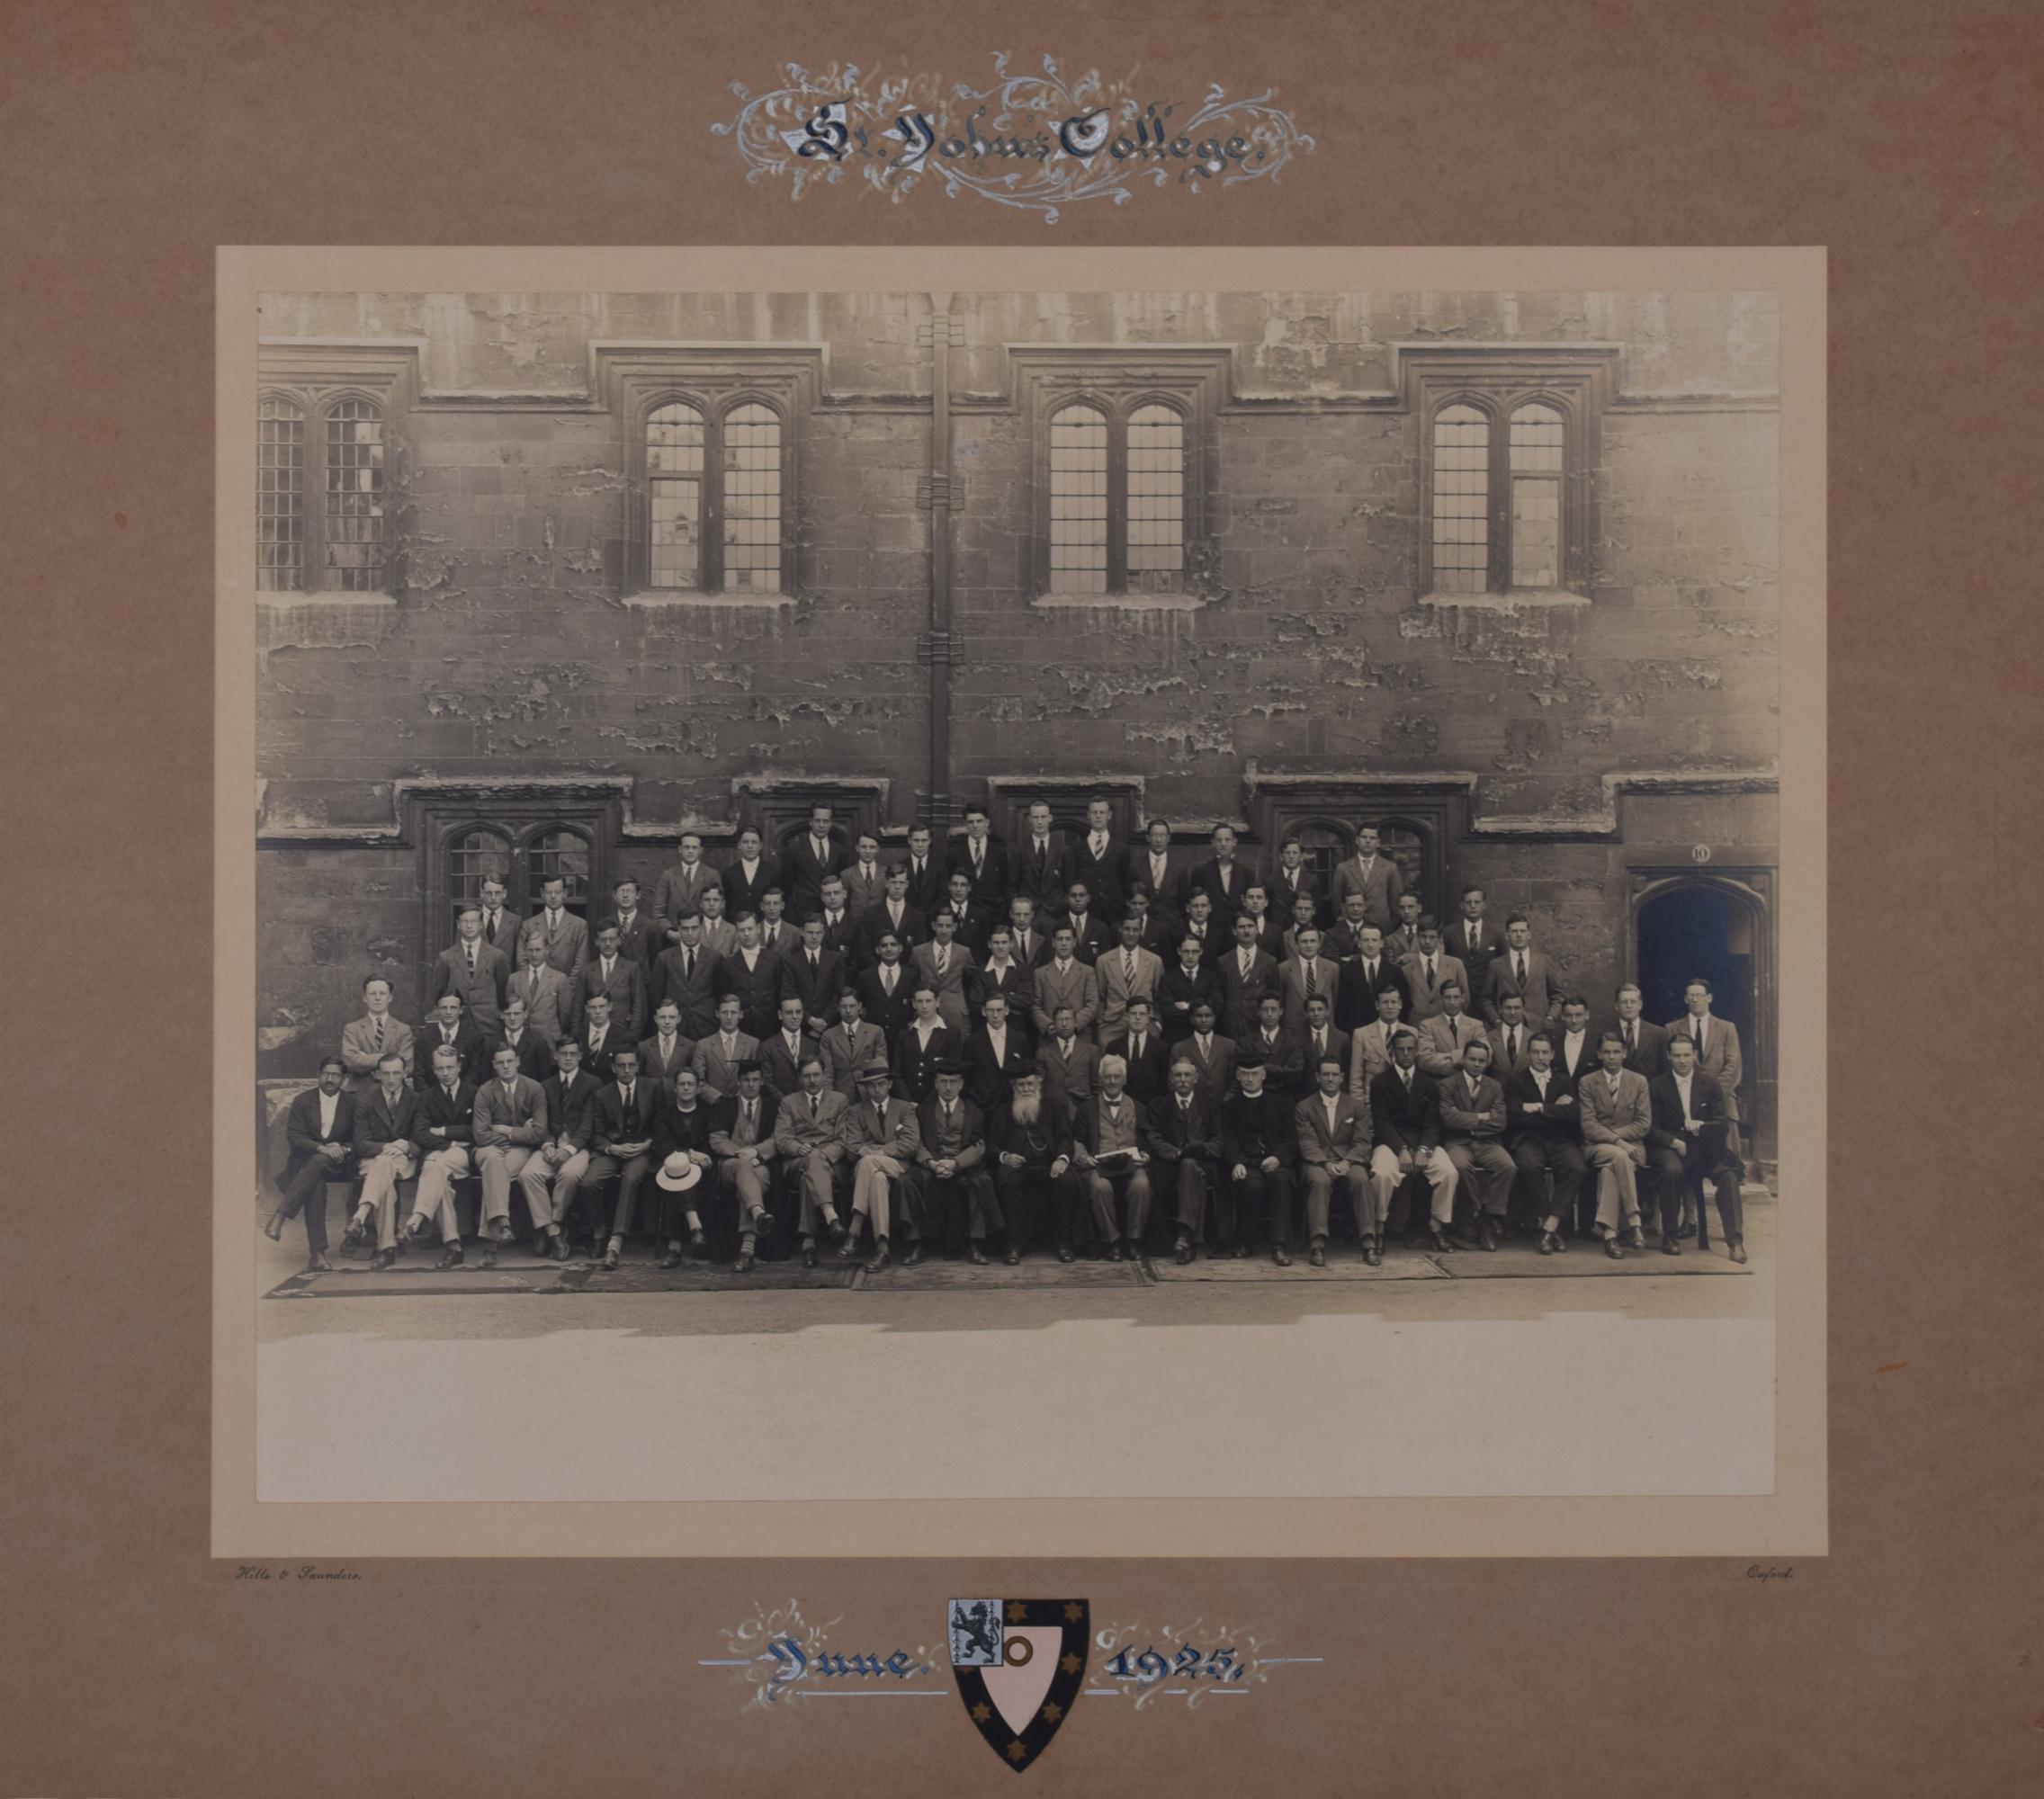 Unknown Black and White Photograph - St John's College, Oxford 1920s photograph by Hills & Saunders